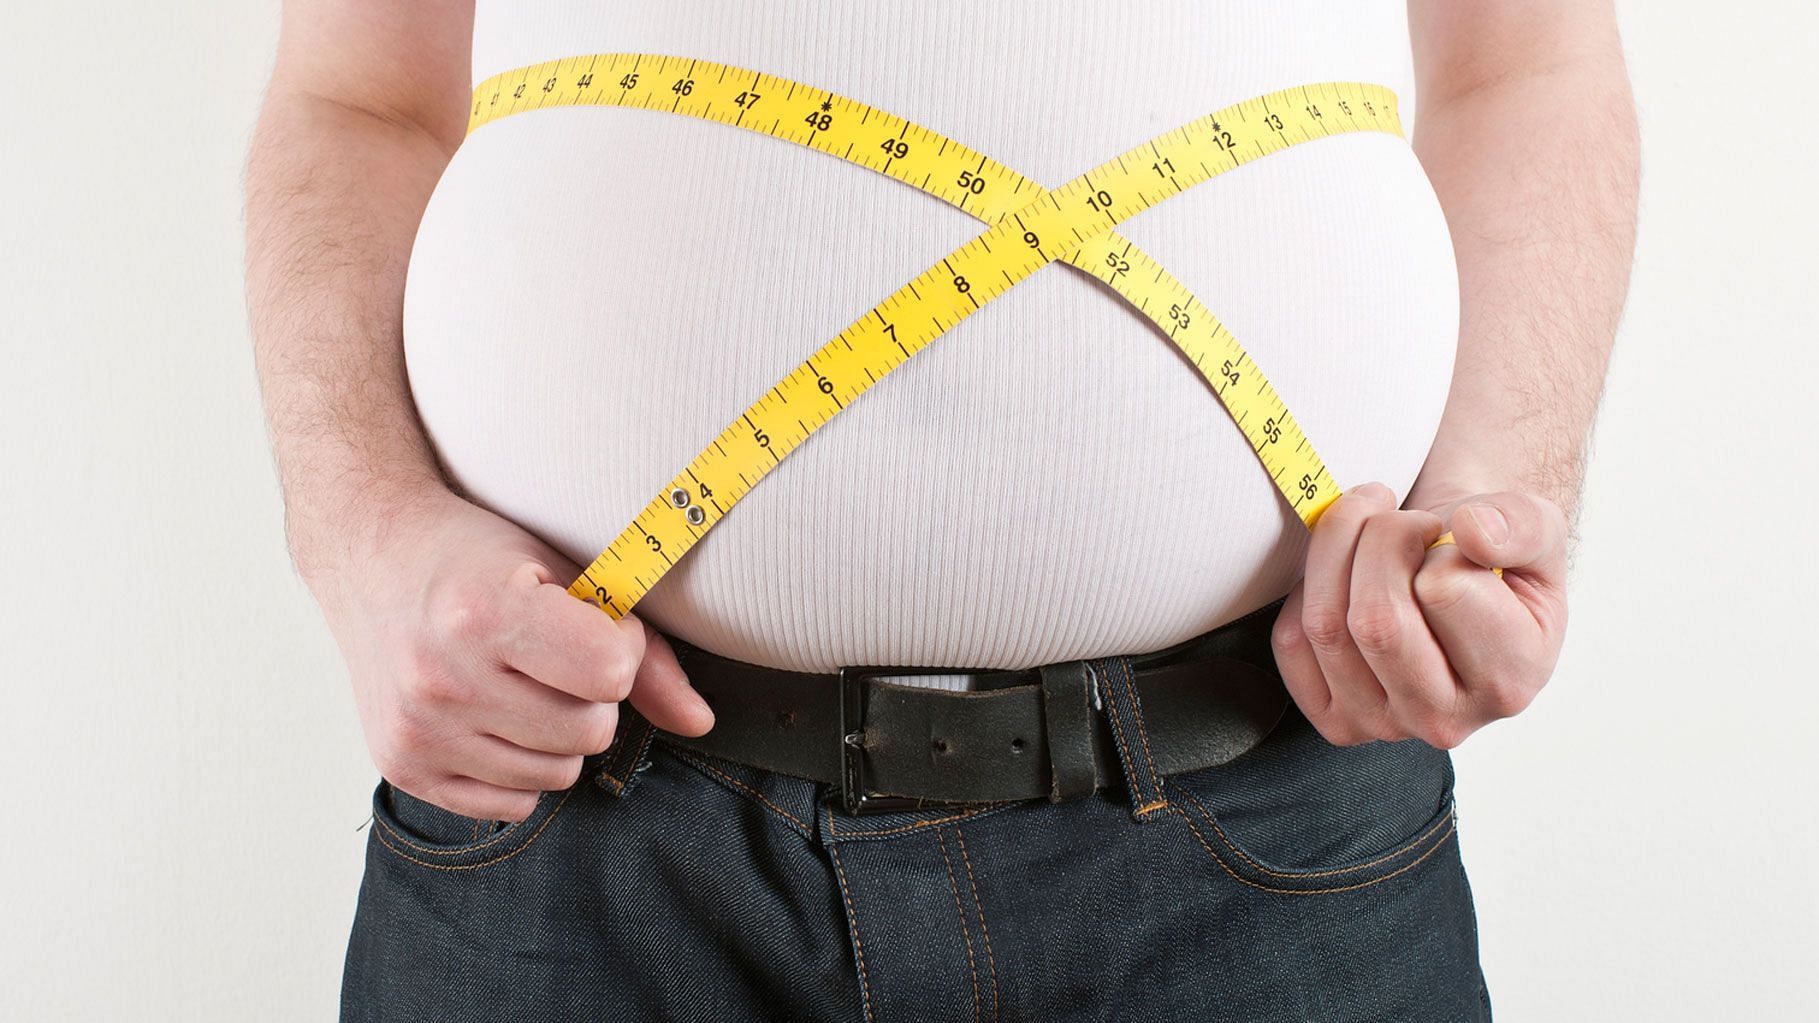  Obesity is known as one of the leading risk factors for developing diabetes.